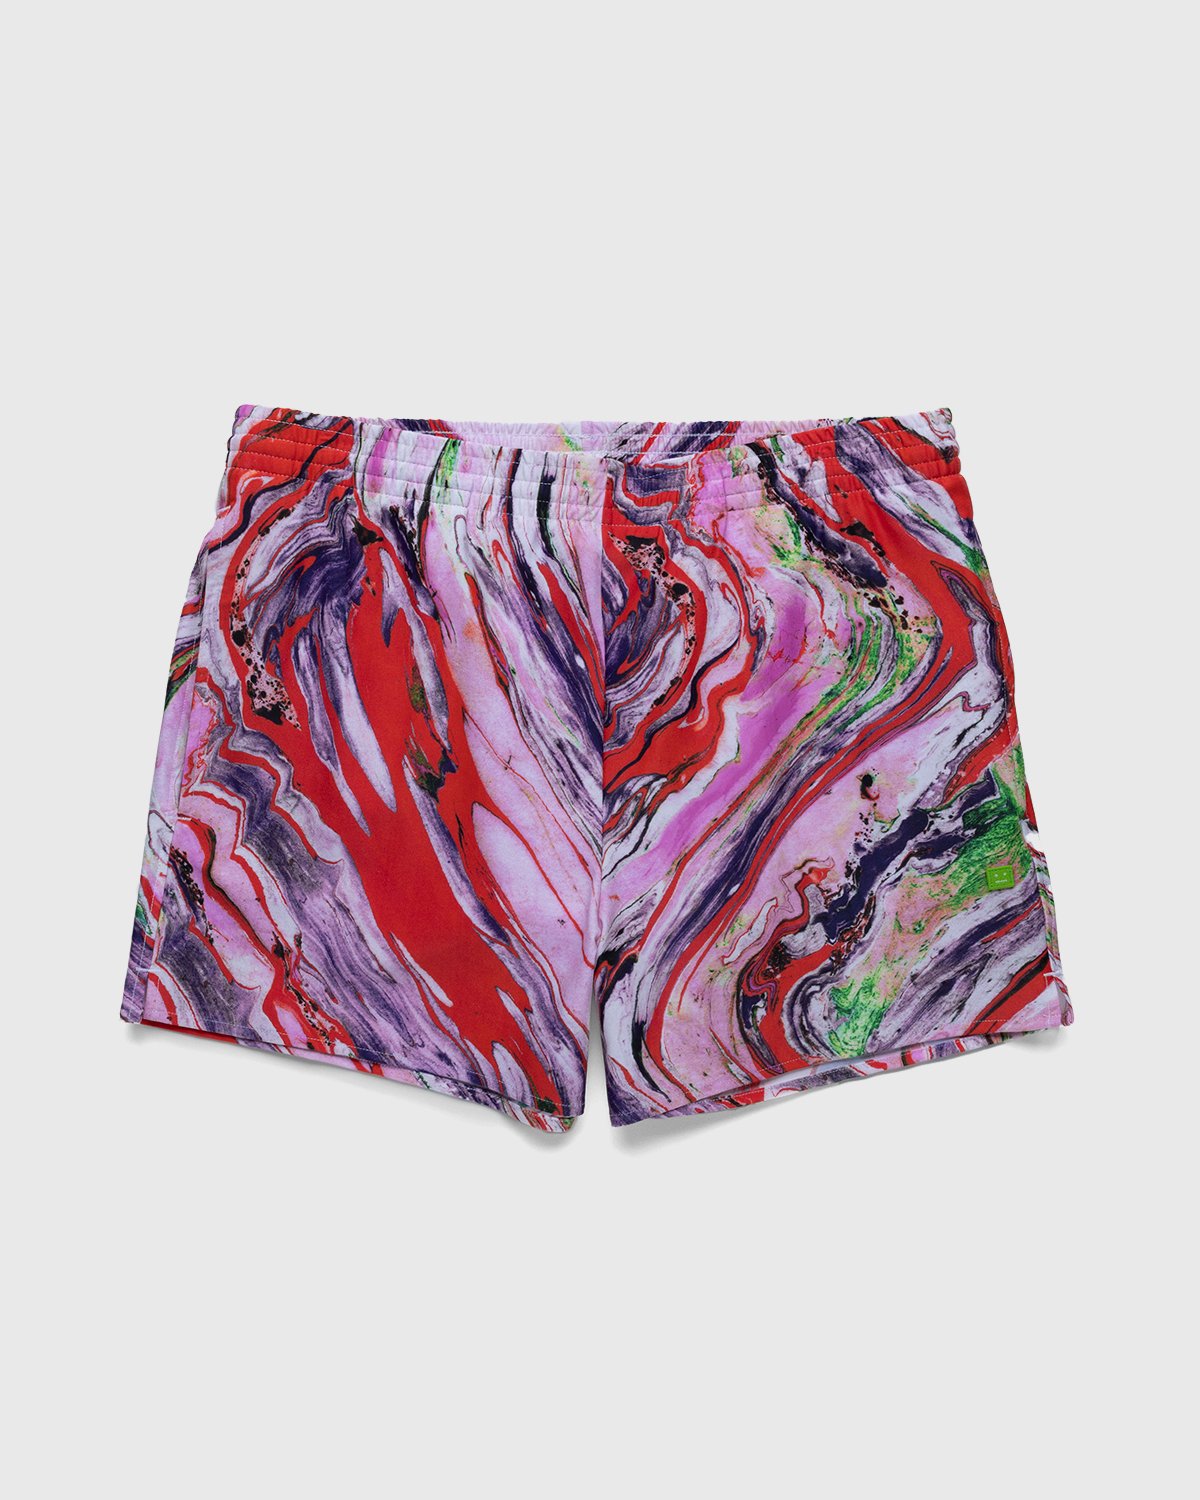 Acne Studios - Marble Swim Shorts Neon Red - Clothing - Red - Image 1